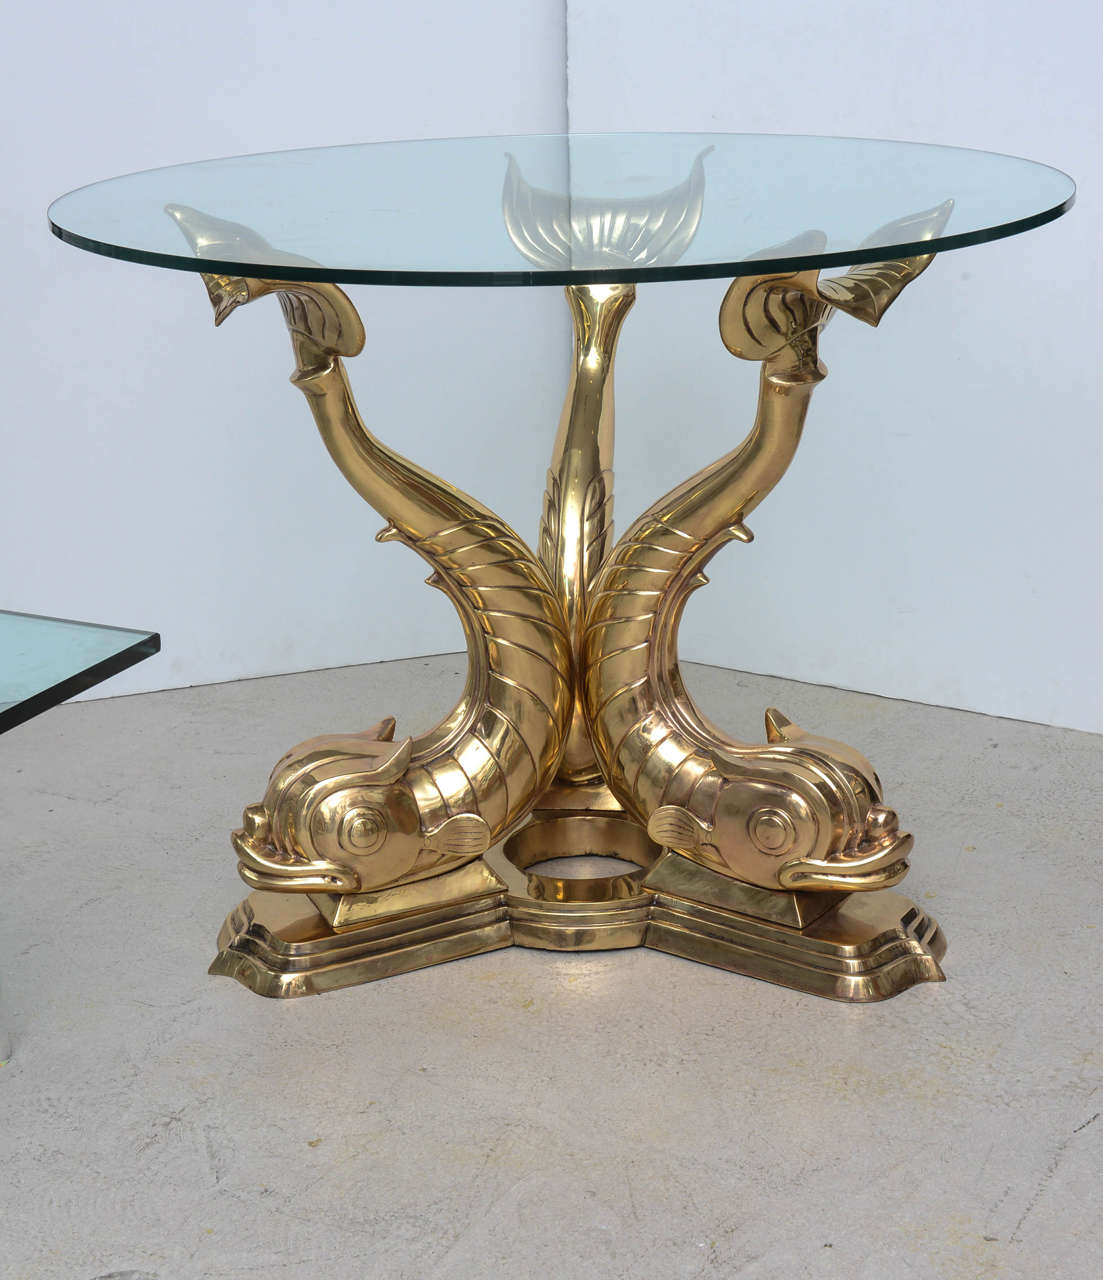 Sculptural stylized brass center table with dolphin motif and circular glass top.